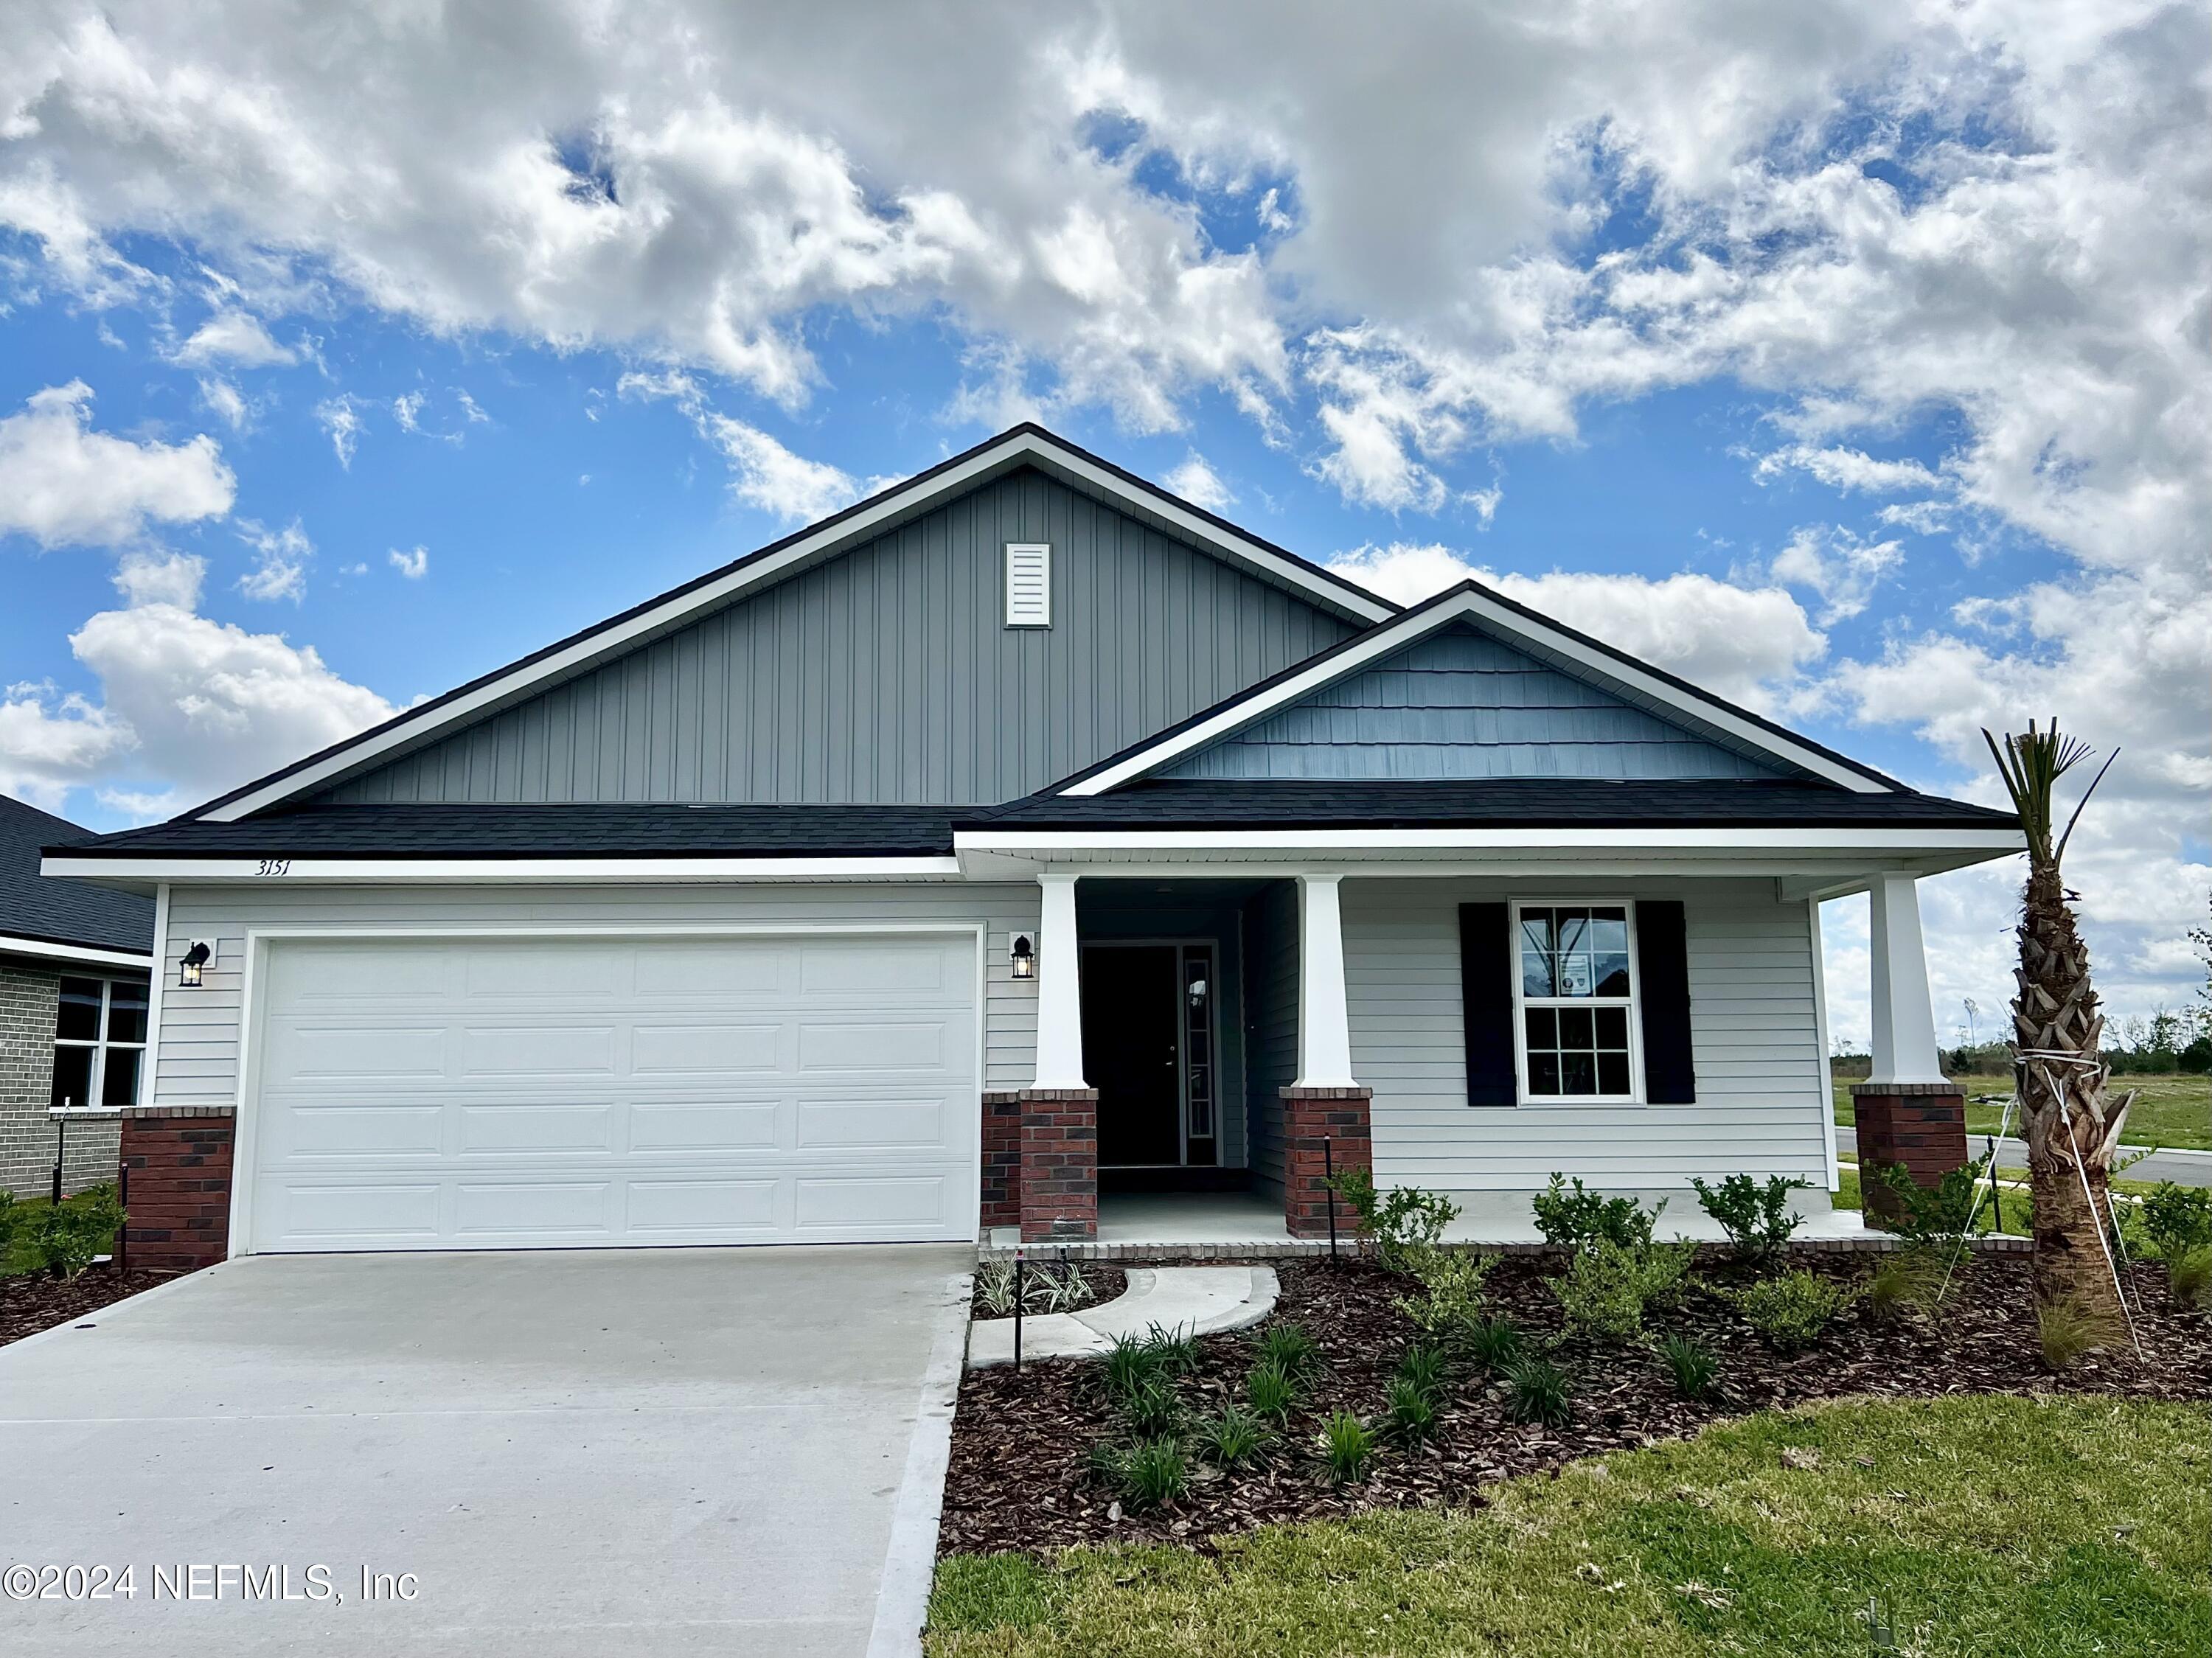 Green Cove Springs, FL home for sale located at 3151 Laurel Springs Drive, Green Cove Springs, FL 32043